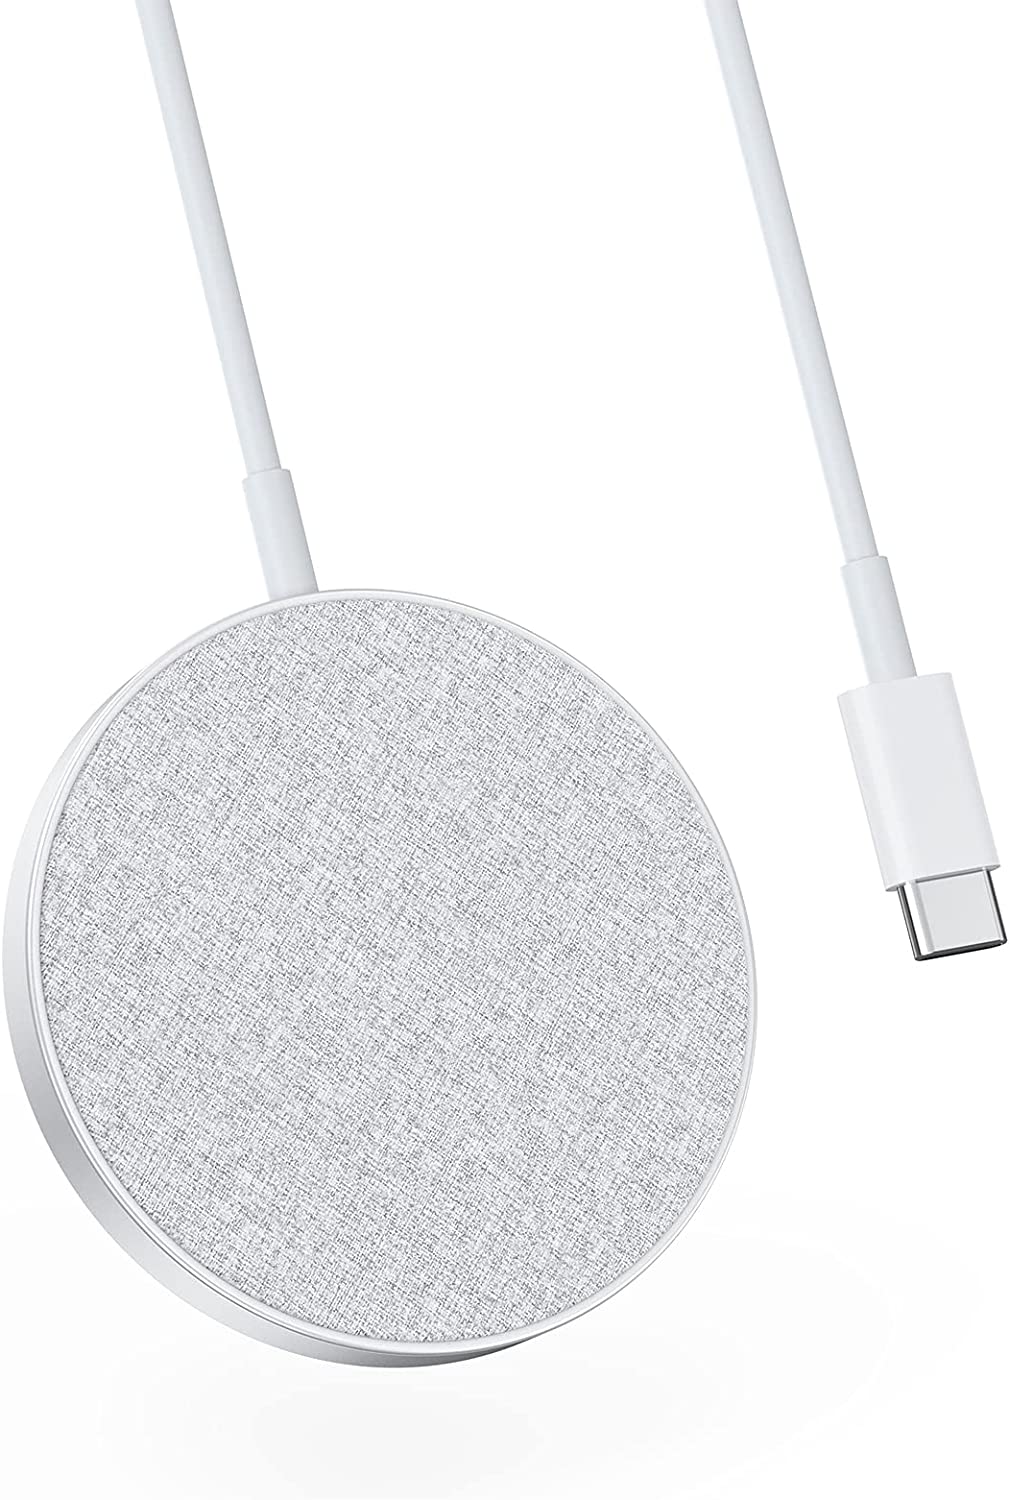 Anker - A2566H41-1 PowerWave Select+ Magnetic Charging Pad - Silver